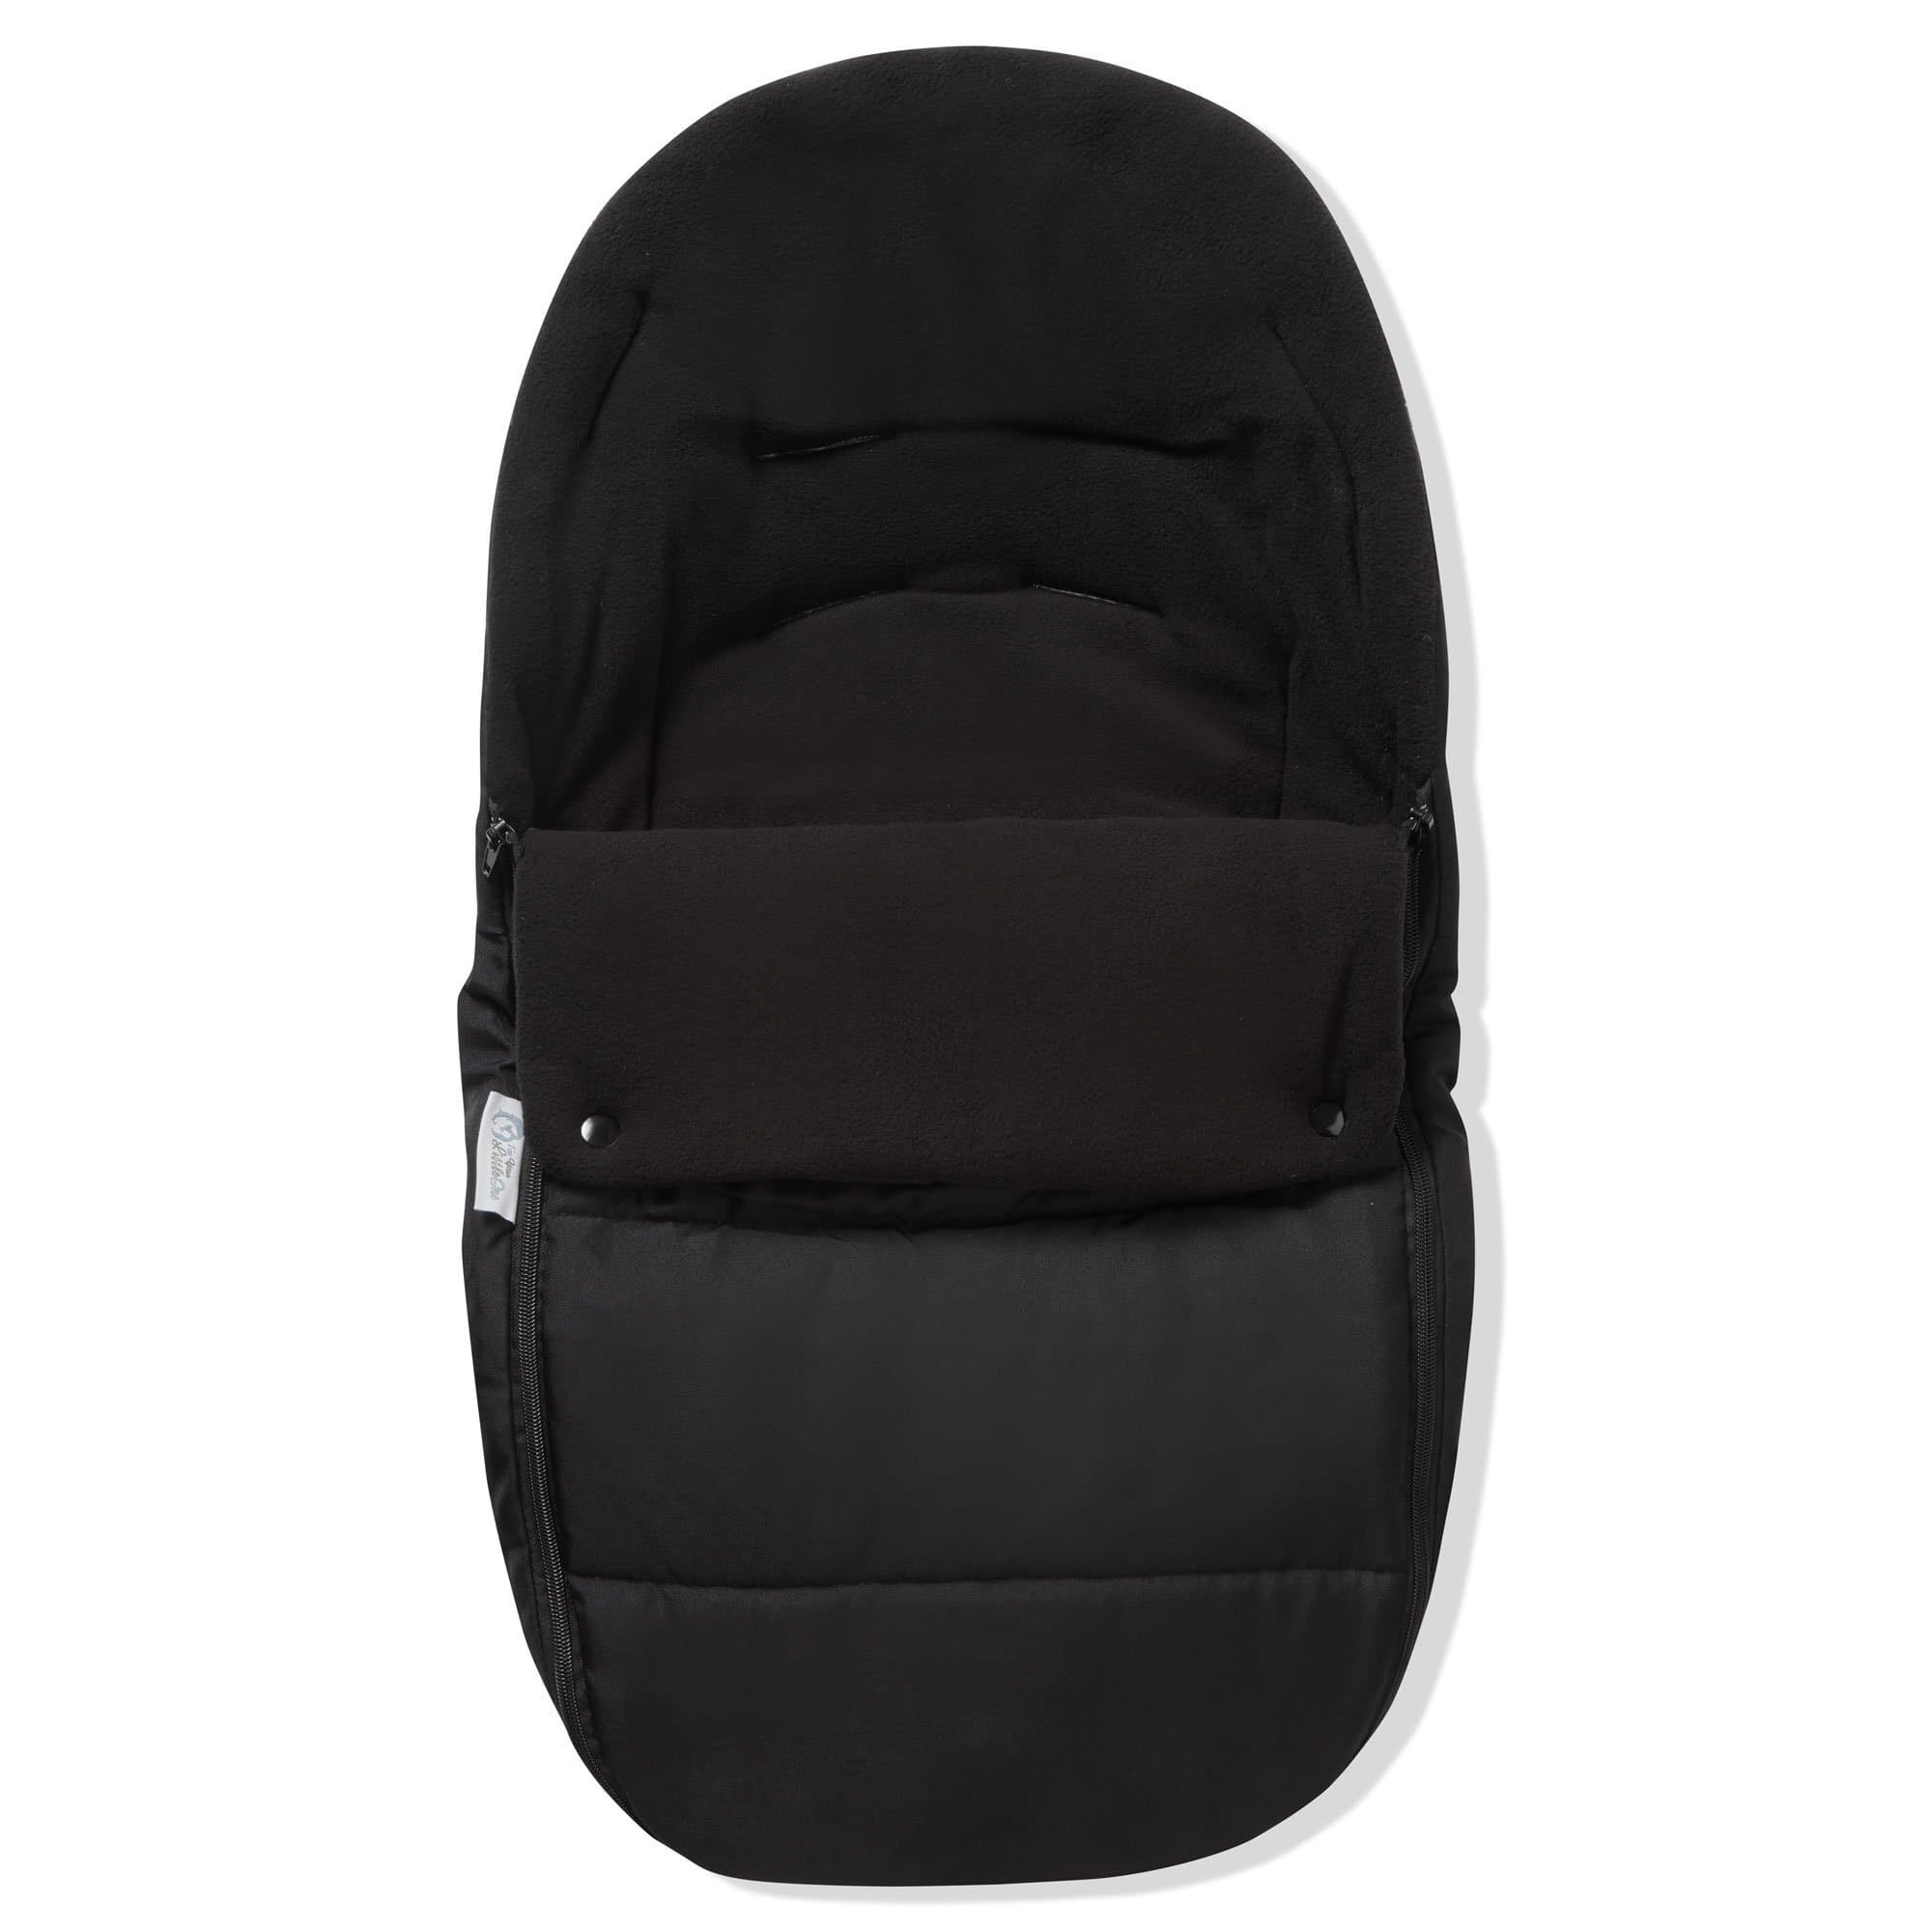 Premium Car Seat Footmuff / Cosy Toes Compatible With Red Kite - Black Jack / Fits All Models | For Your Little One